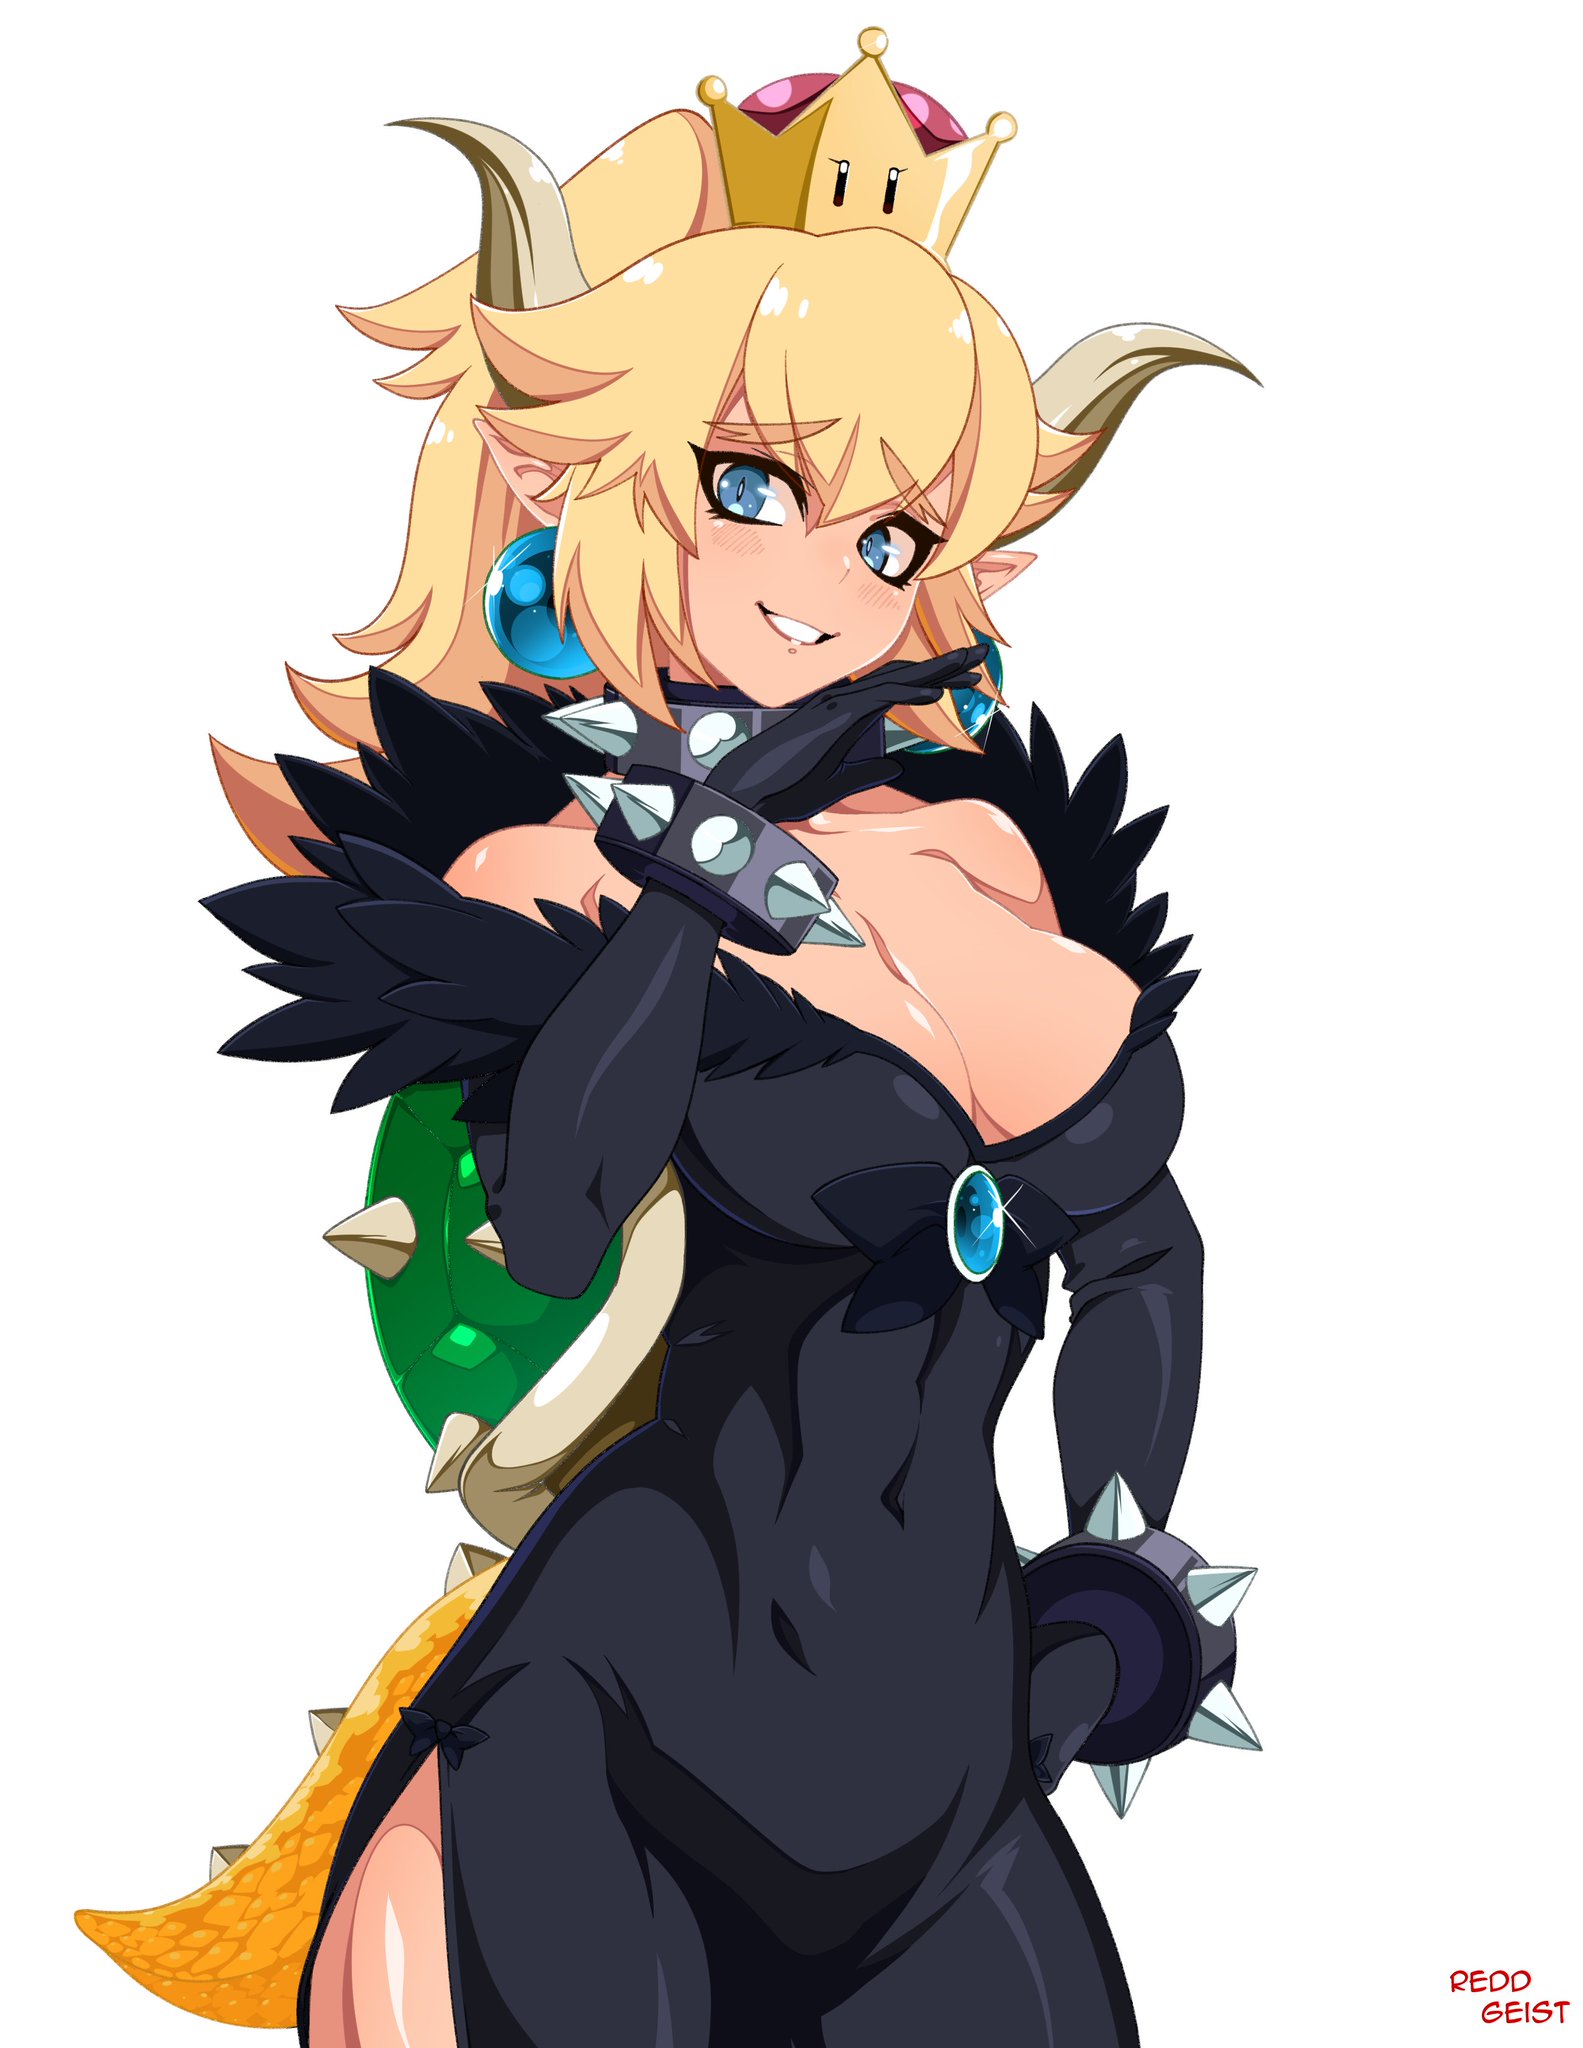 Bowsette is an anthropomorphised genderbend version of the Super Mario vill...